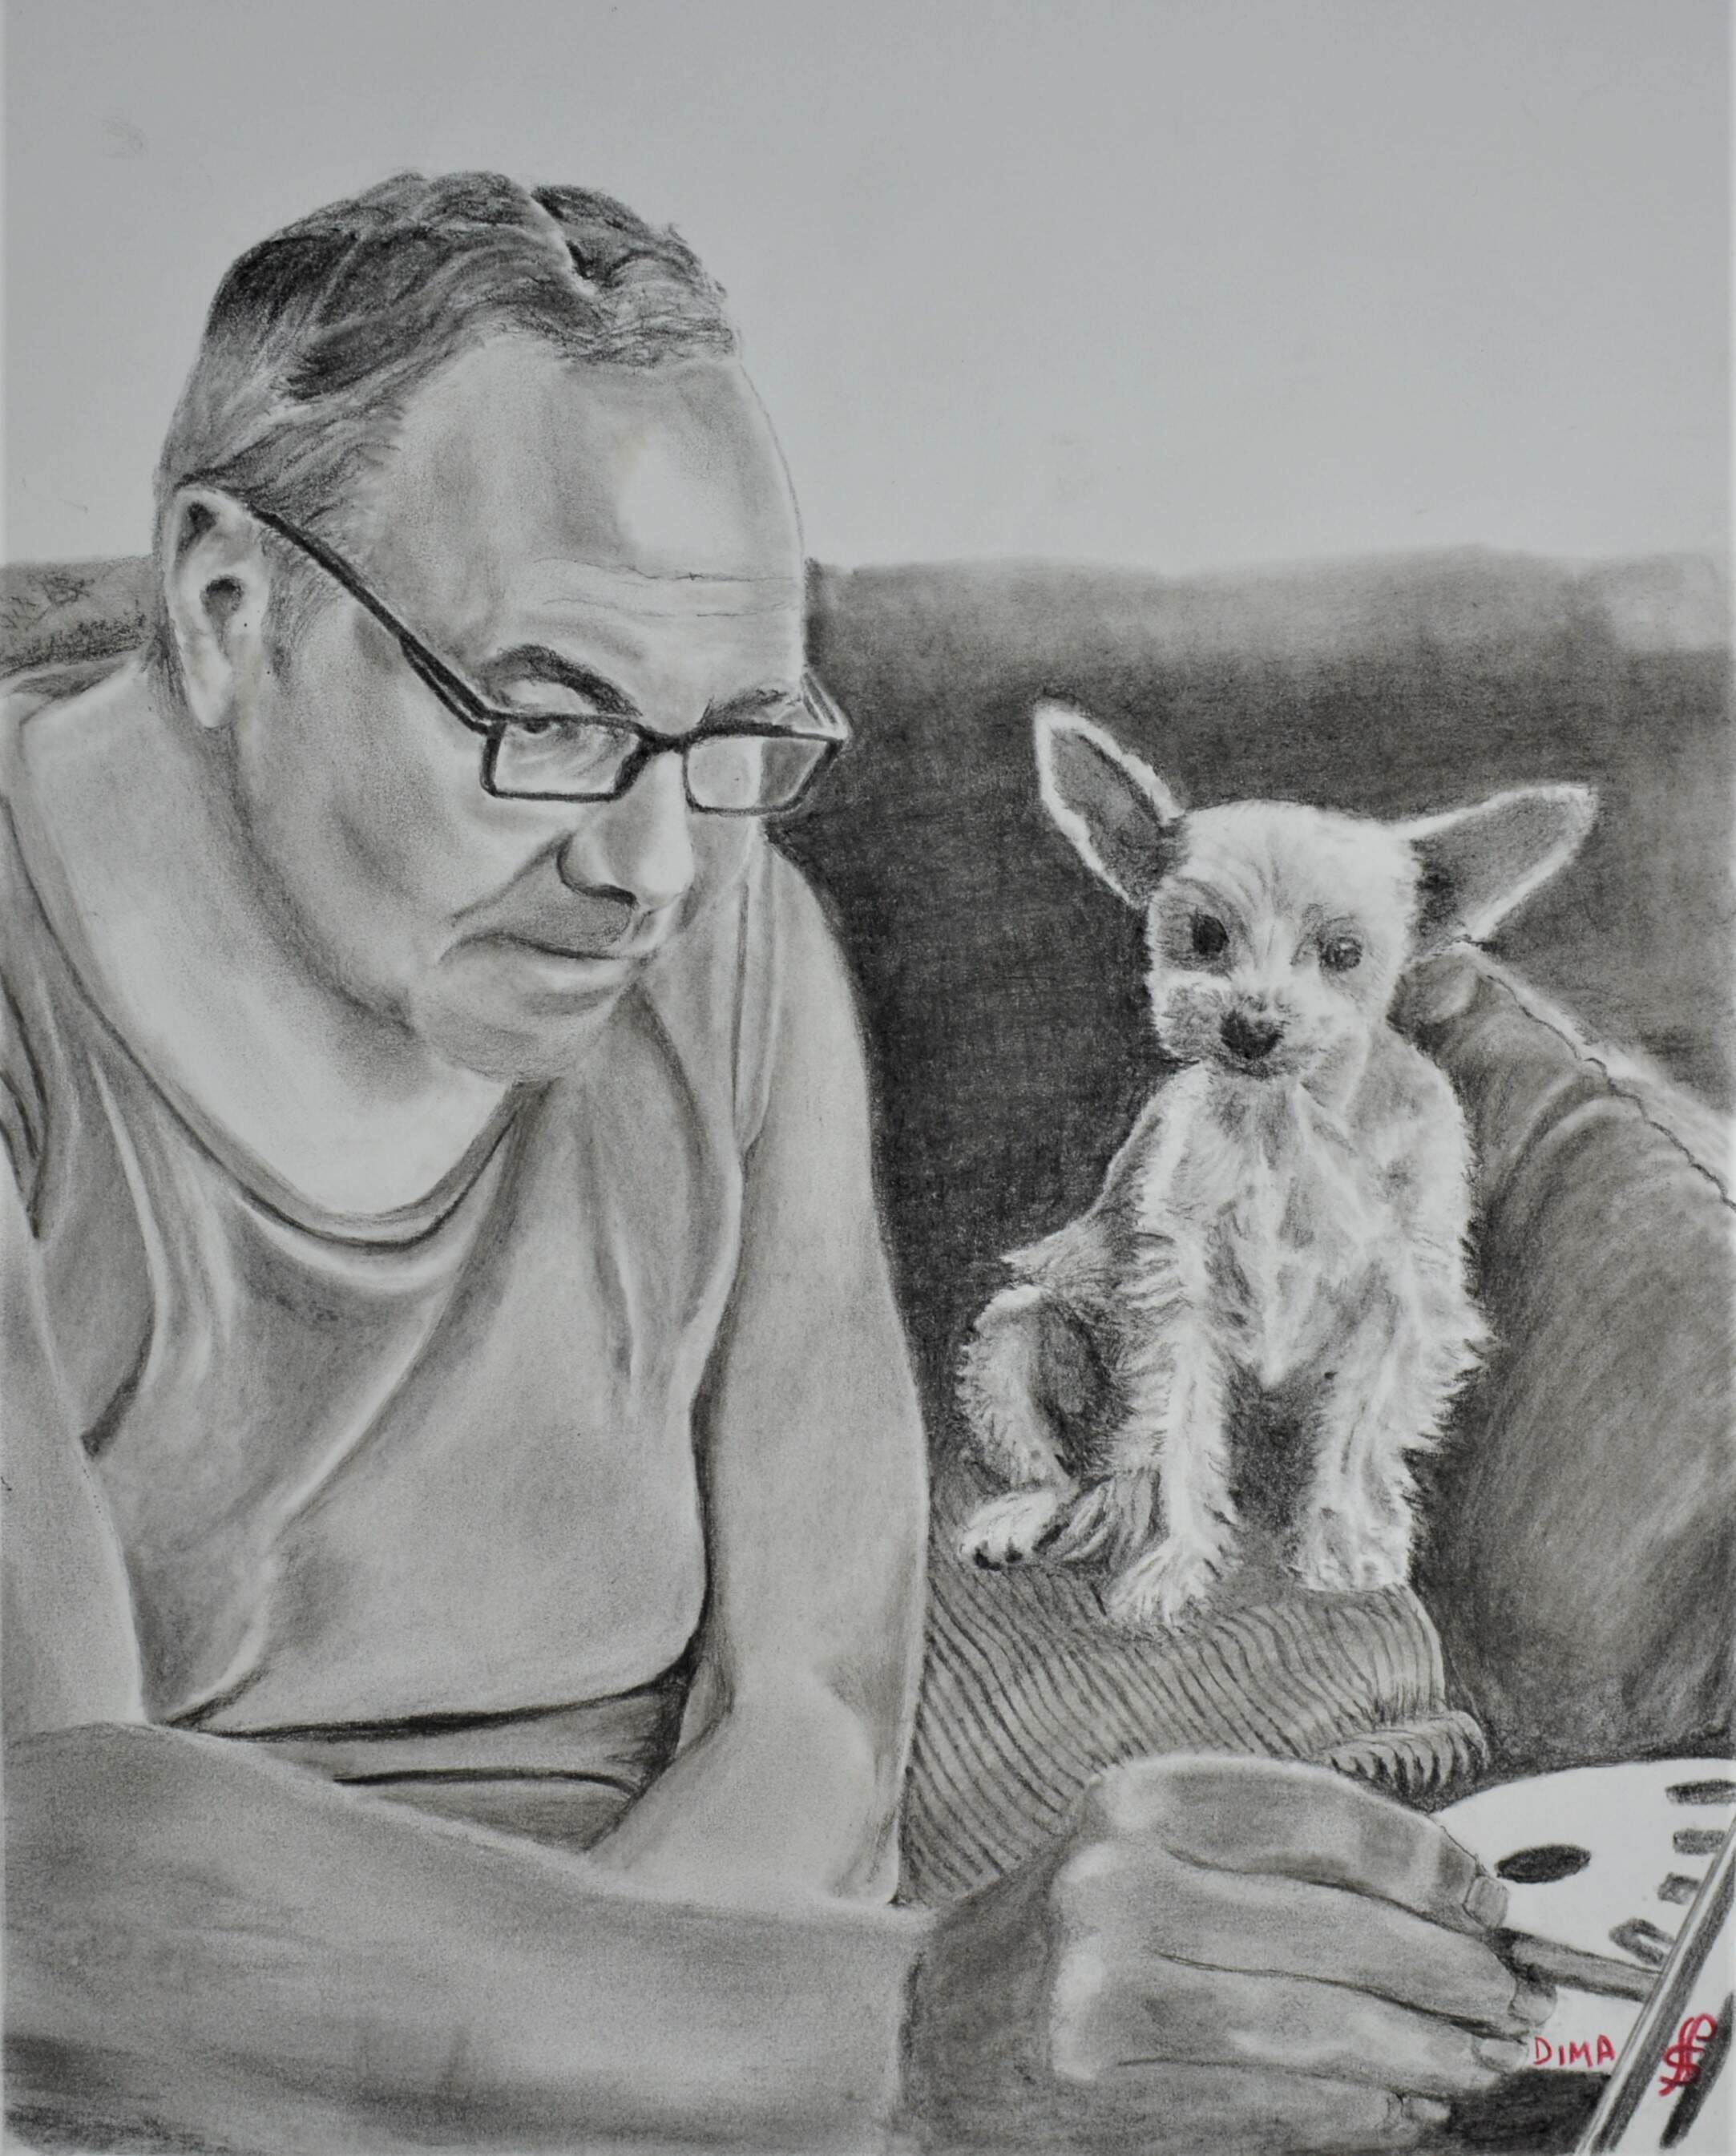 Don at work closely watched by his dog Charlie. Charcoal on white HP cartridge paper.